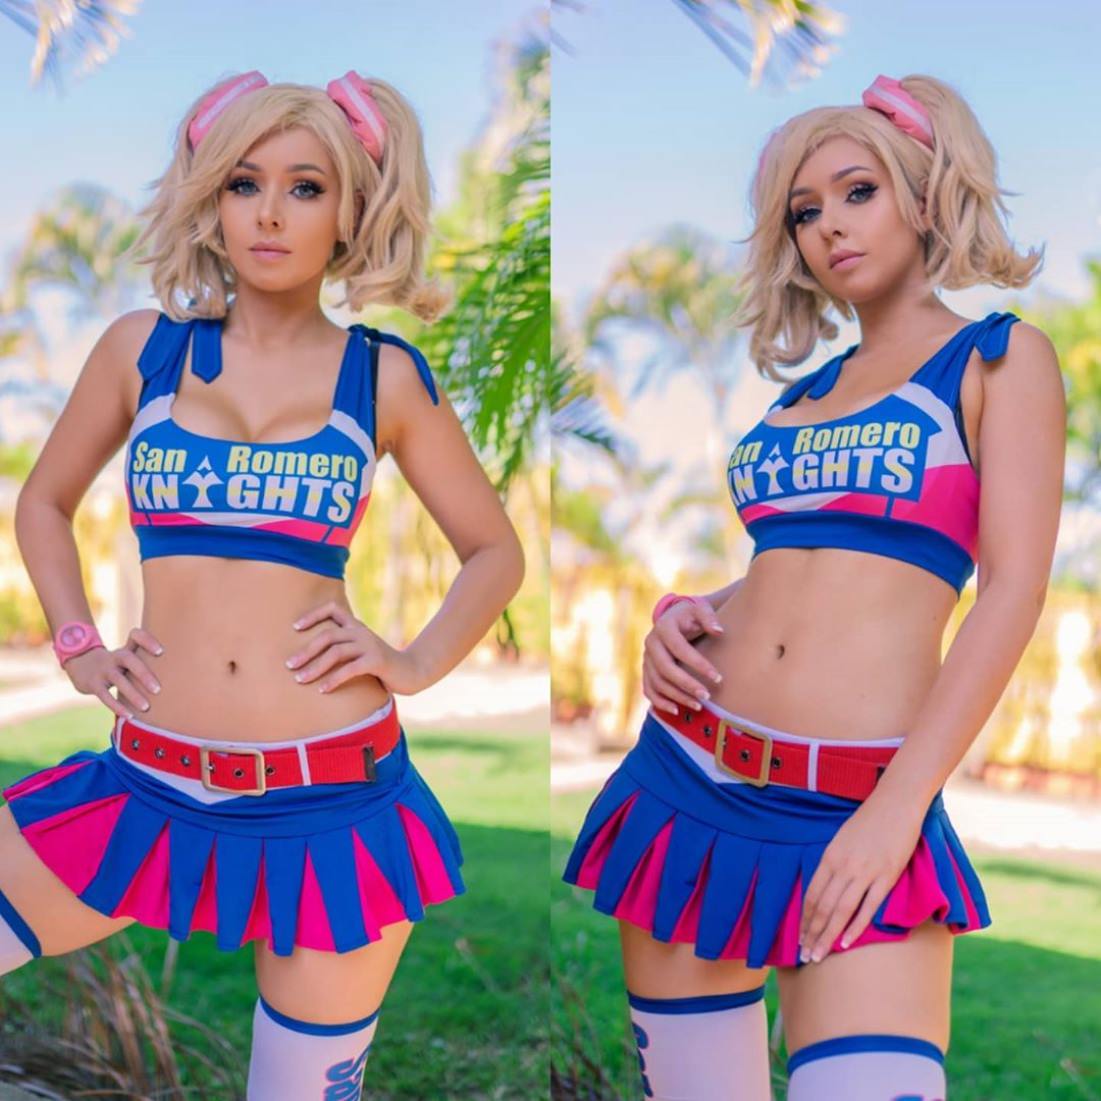 Cosplay by Amy Thunderbolt